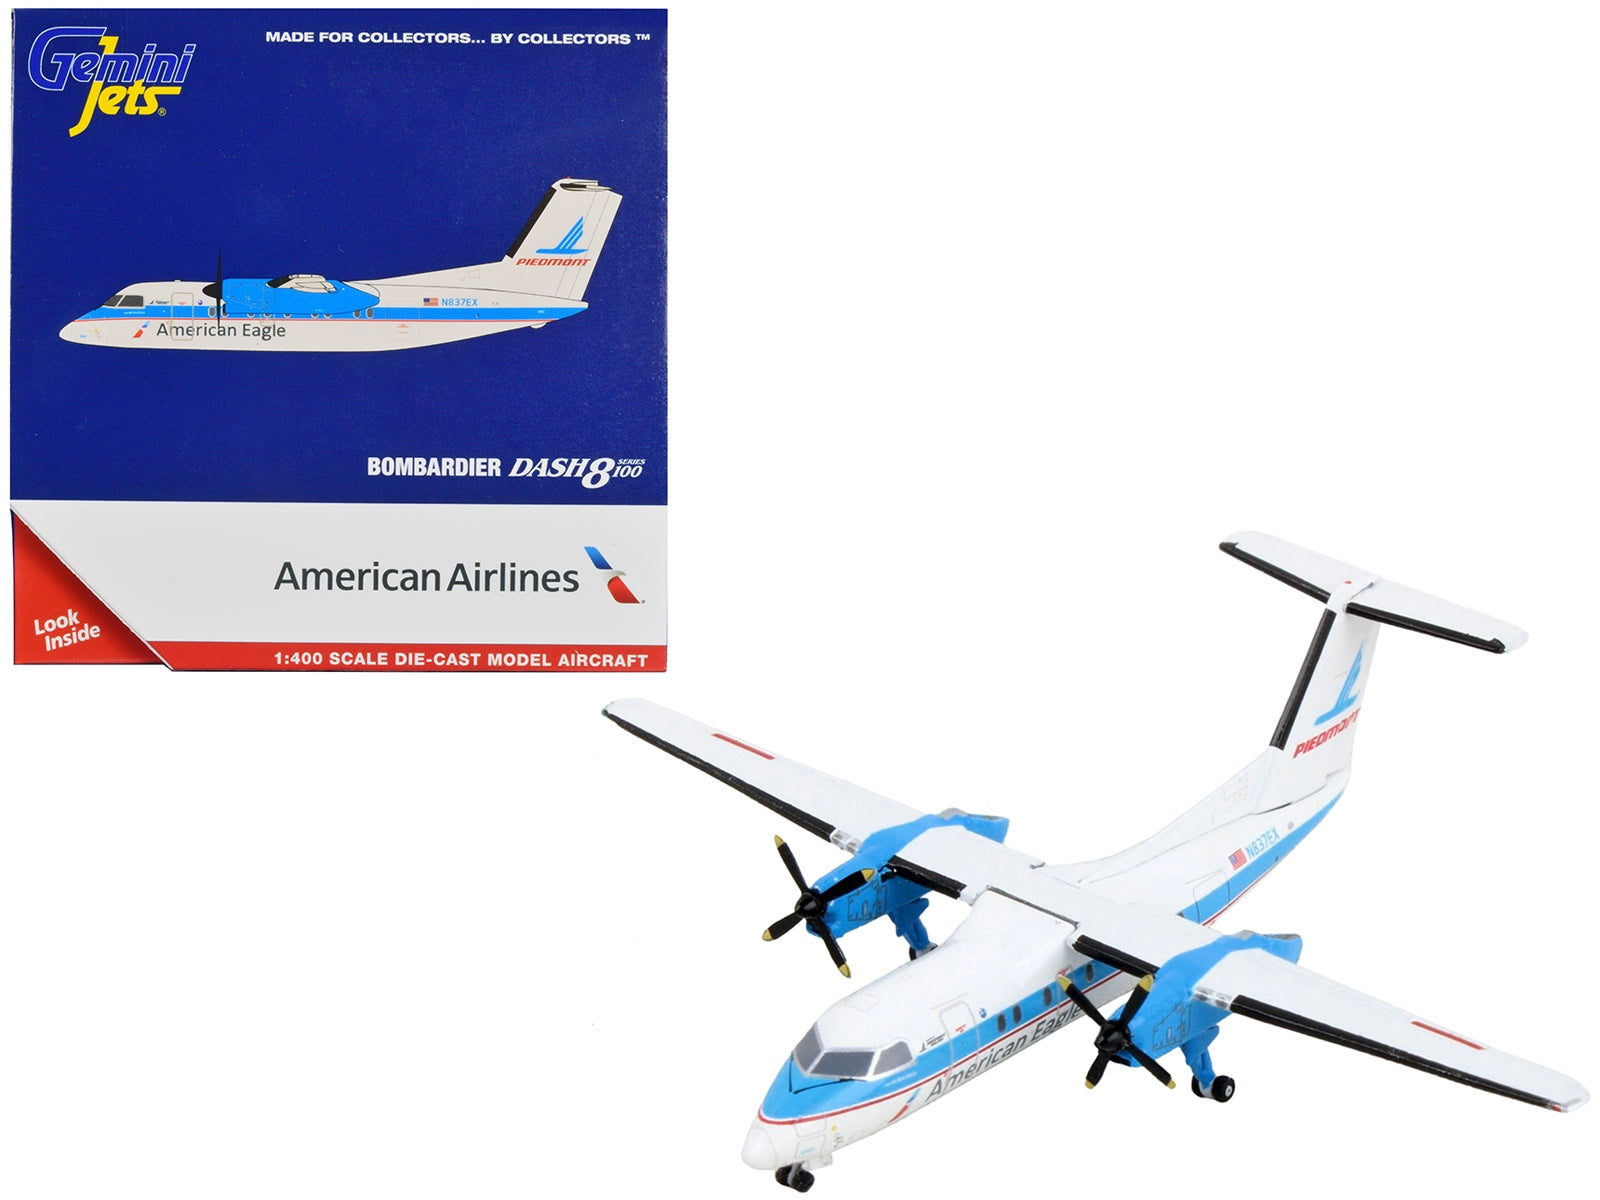 Bombardier Dash 8-100 Commercial Aircraft "American Airlines - American Eagle